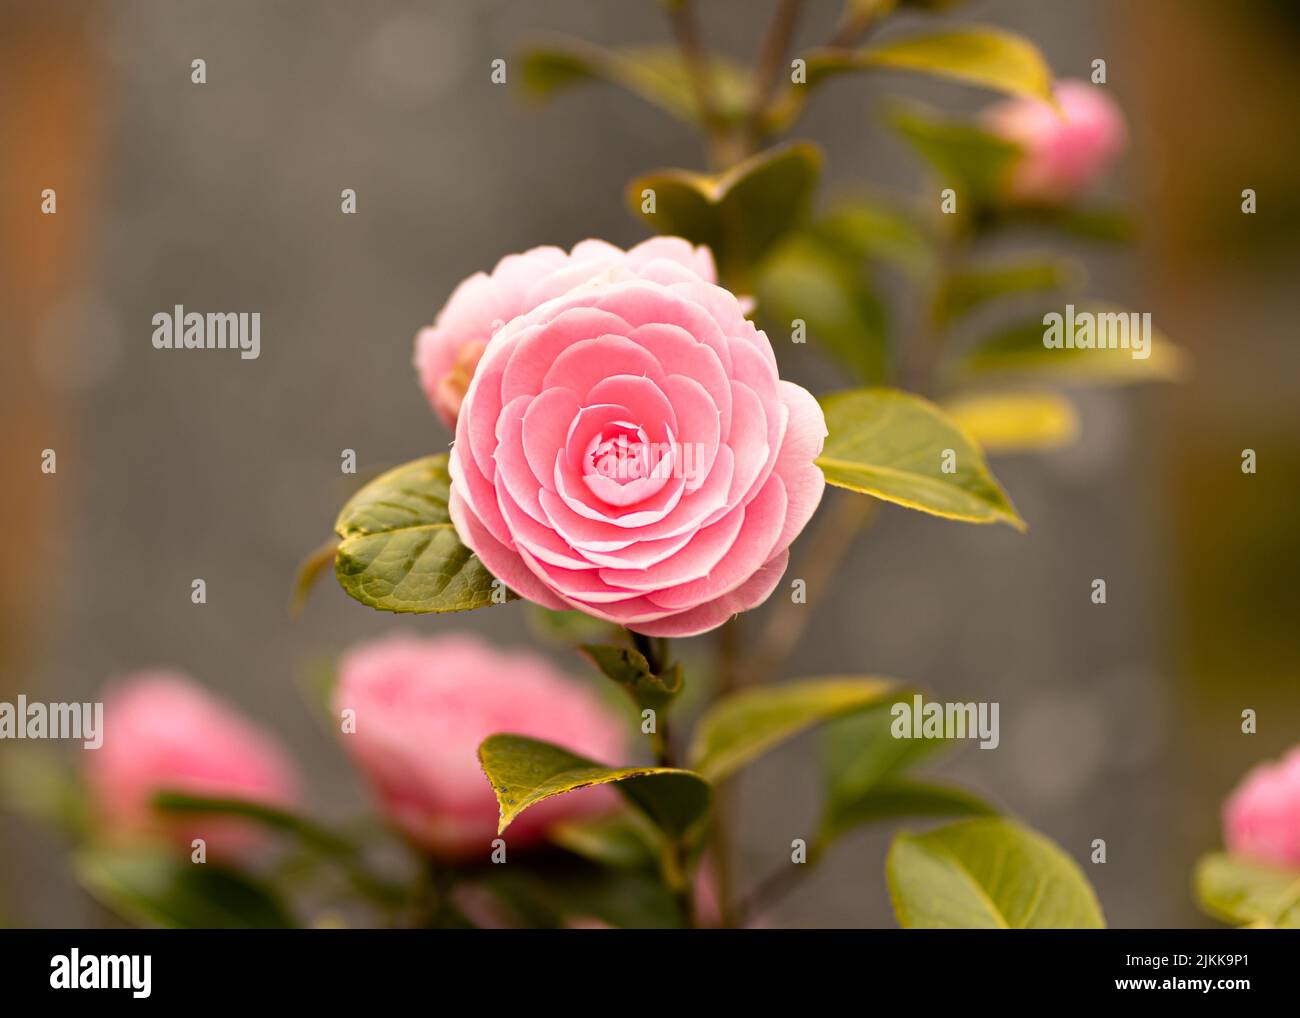 A selective focus shot of a Japanese Camellia flower blooming in the garden during daytime with blurred background Stock Photo